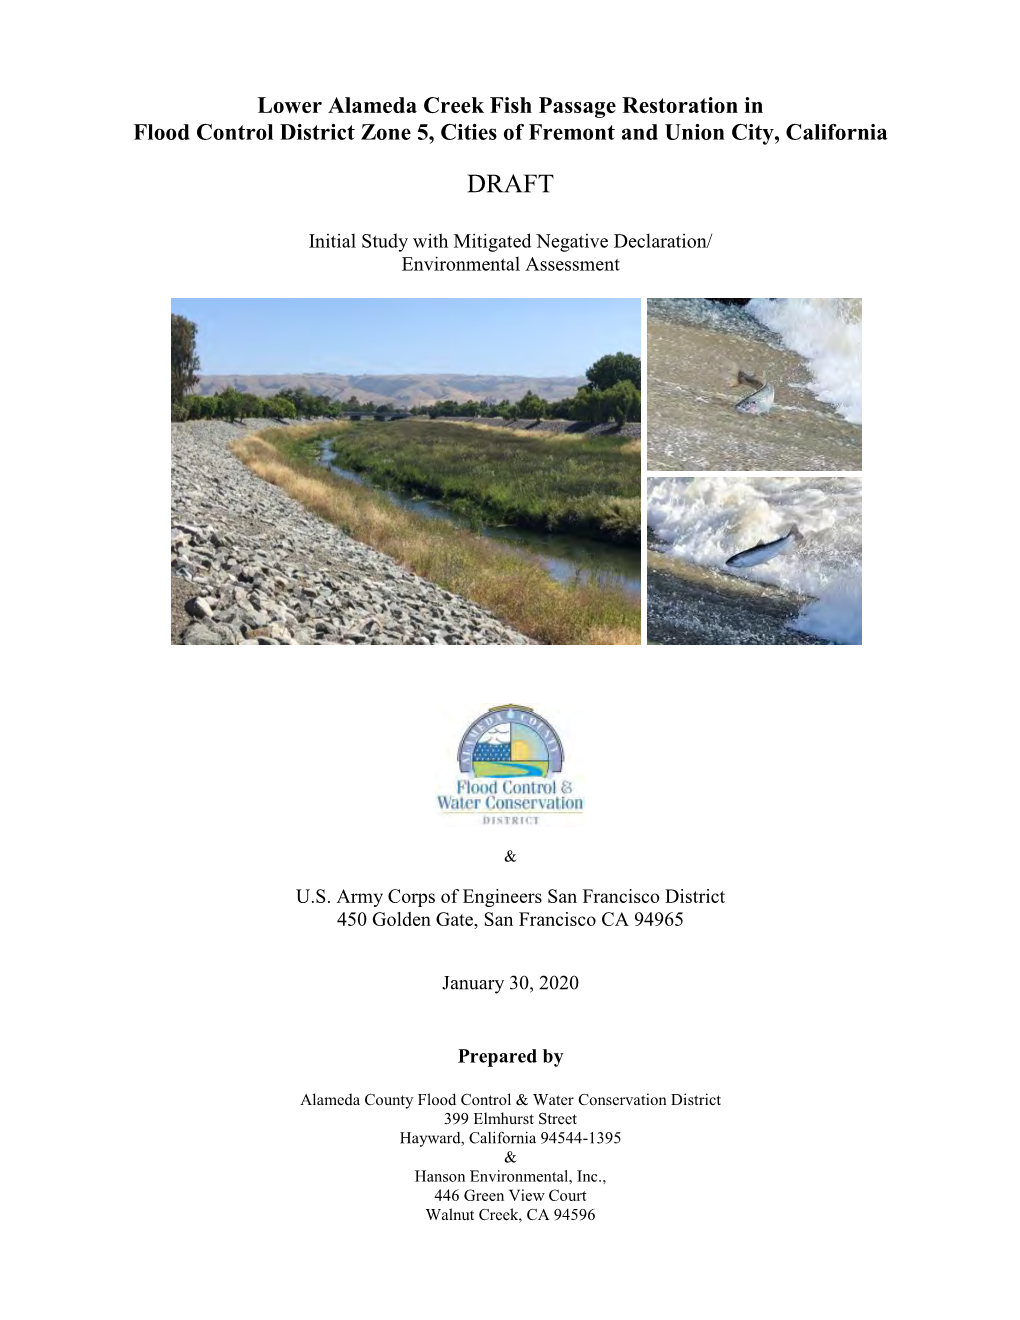 Lower Alameda Creek Fish Passage Restoration in Flood Control District Zone 5, Cities of Fremont and Union City, California